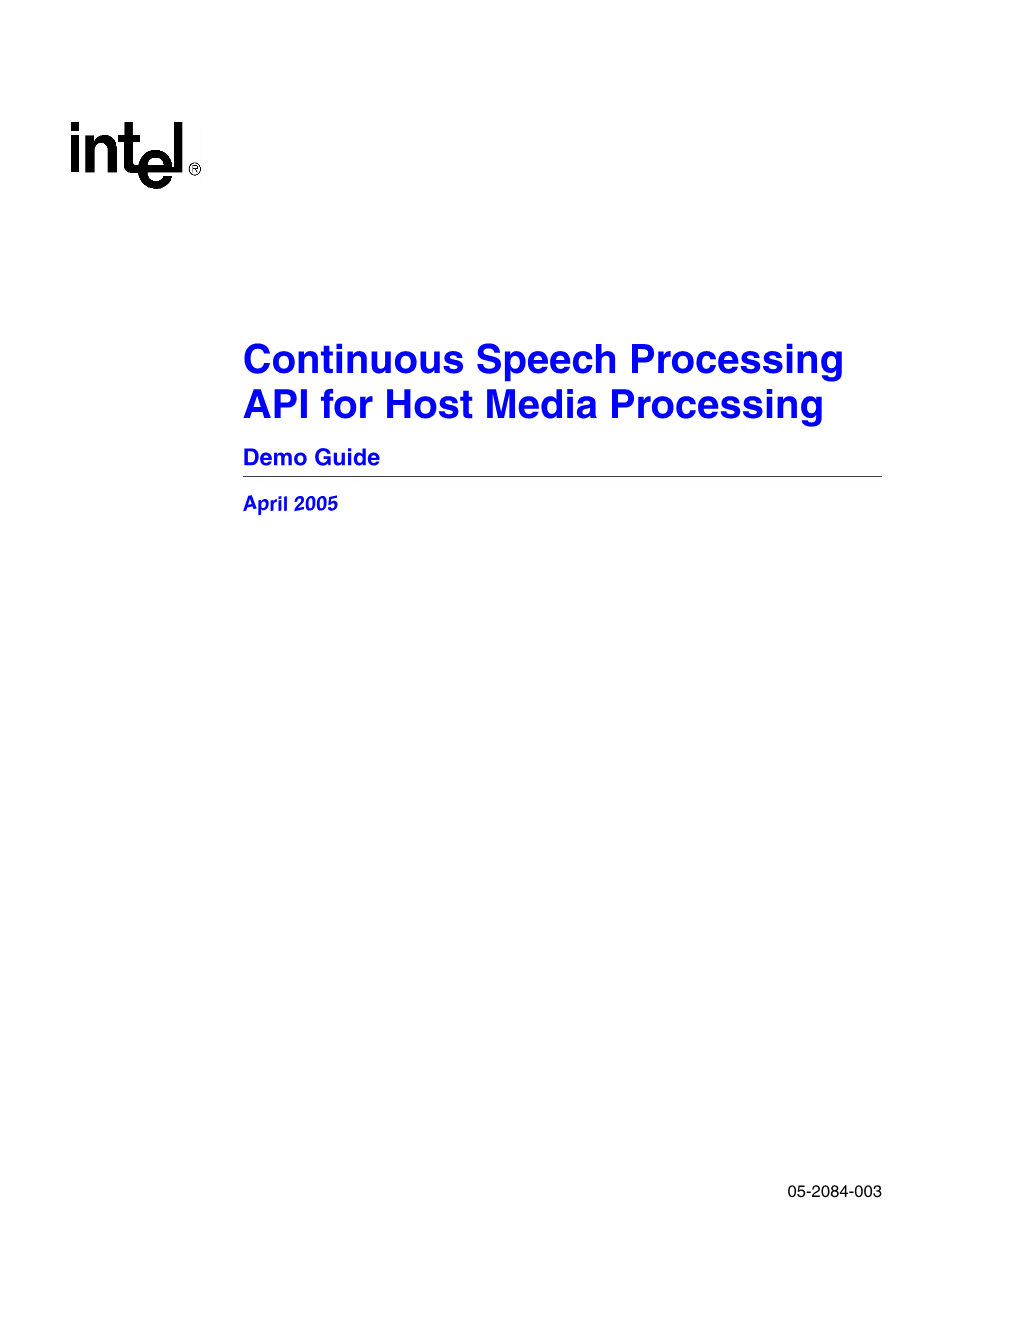 Continuous Speech Processing for Host Media